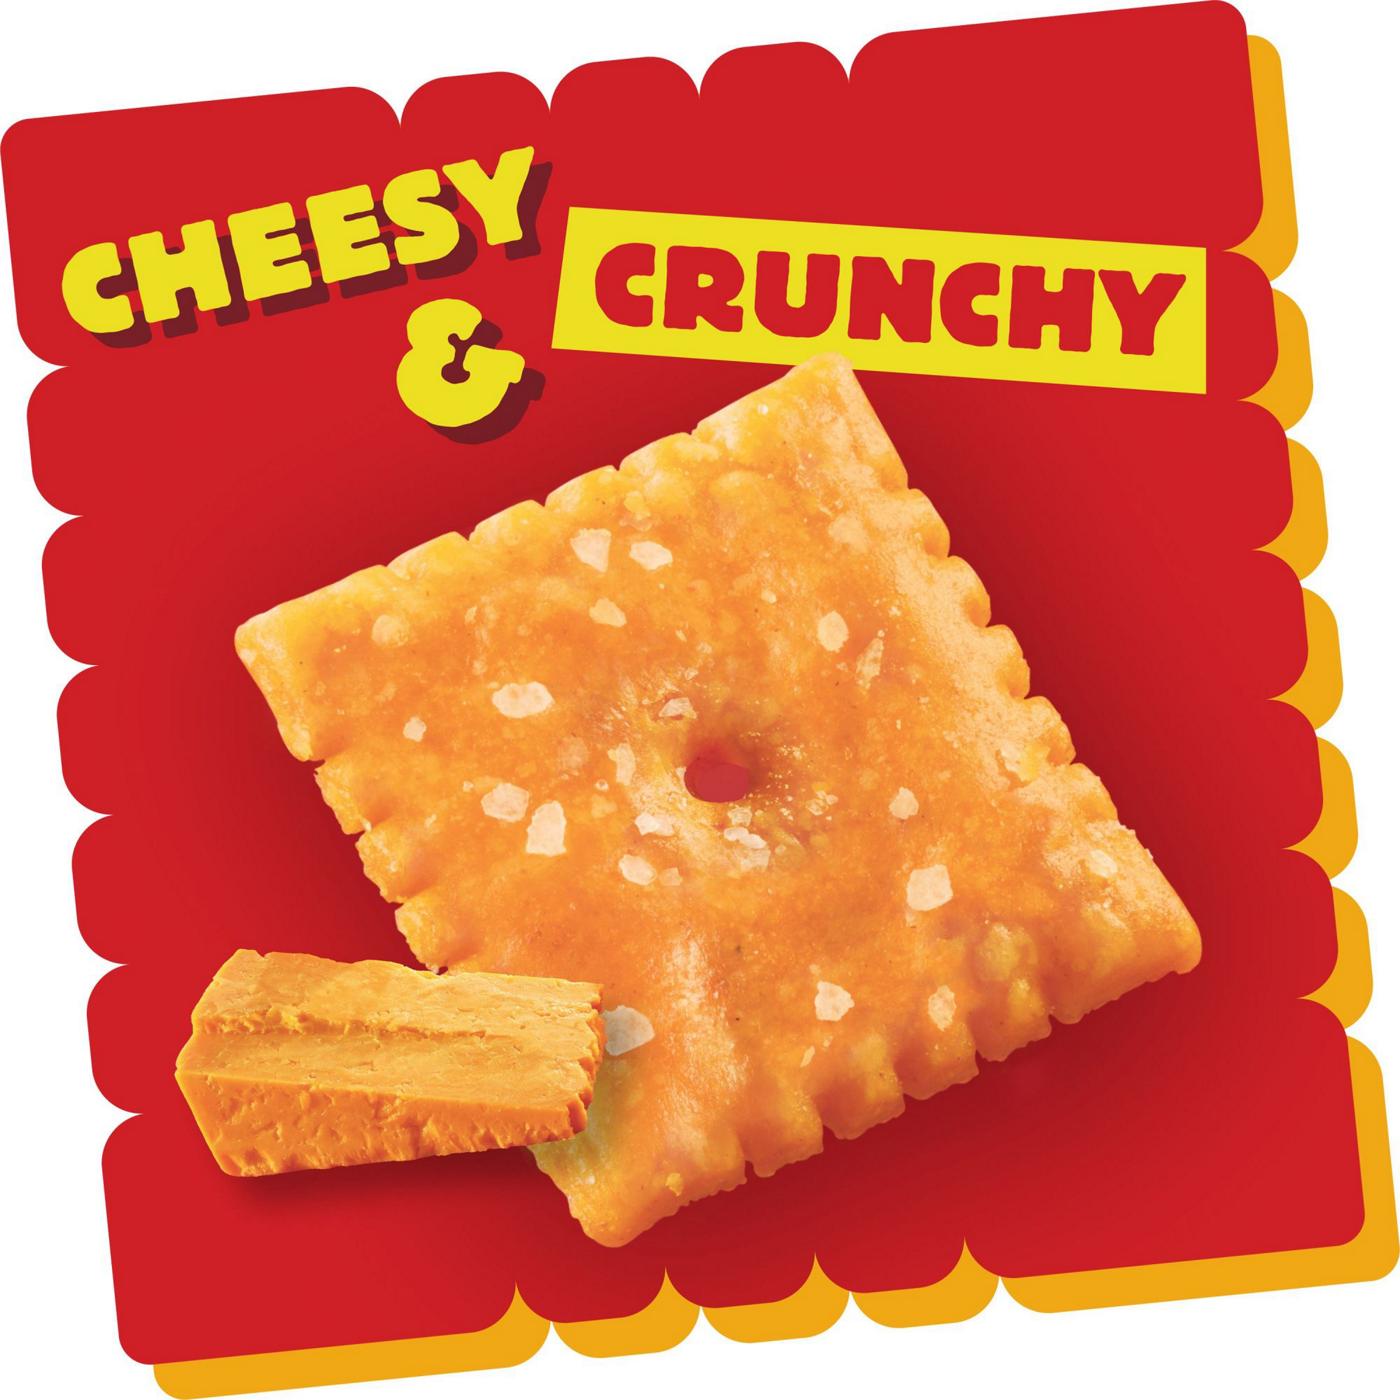 Cheez-It Original Cheese Crackers; image 6 of 6